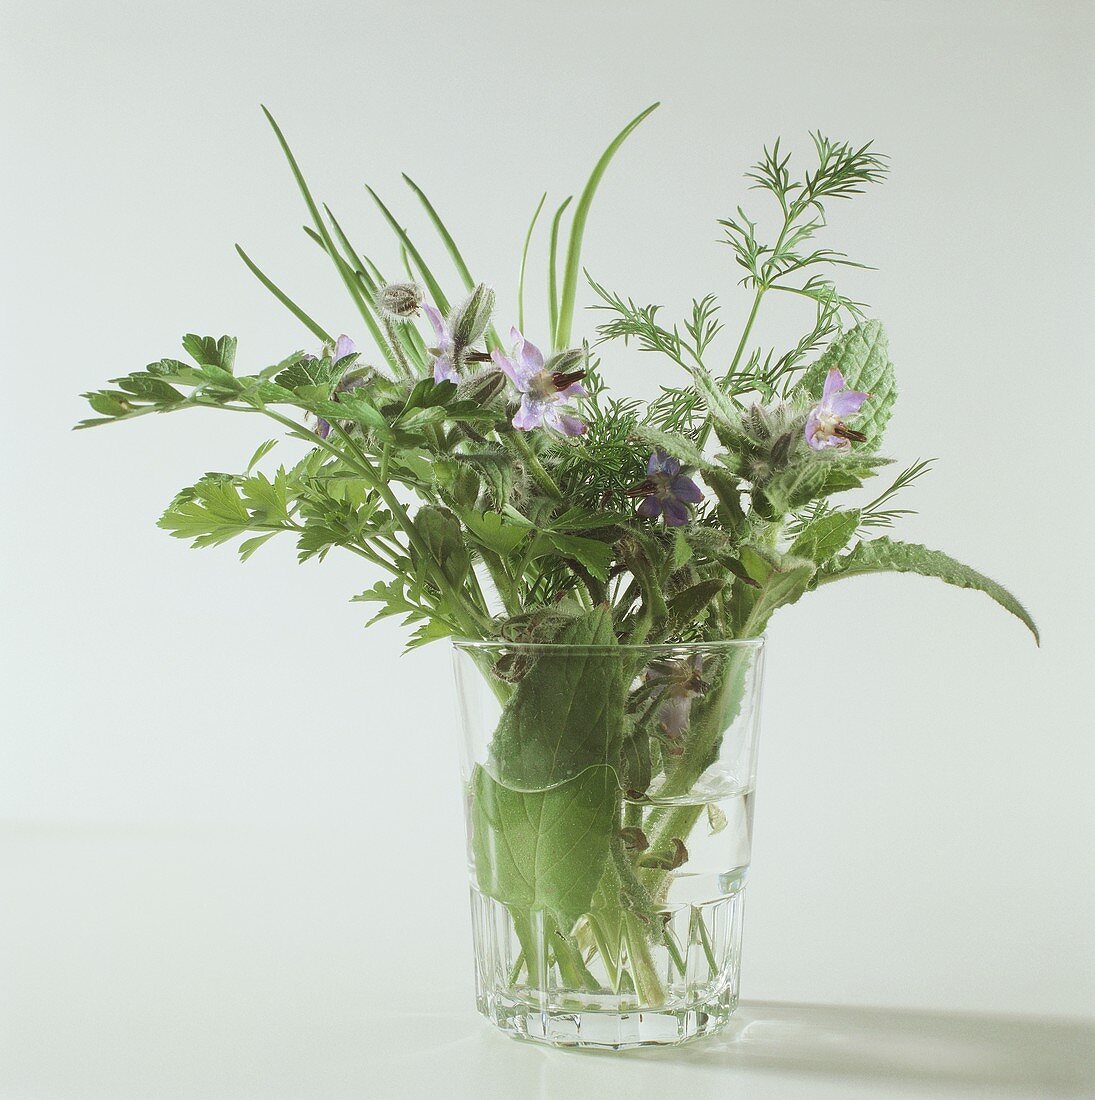 Different Types of Herbs in a Glass Vase